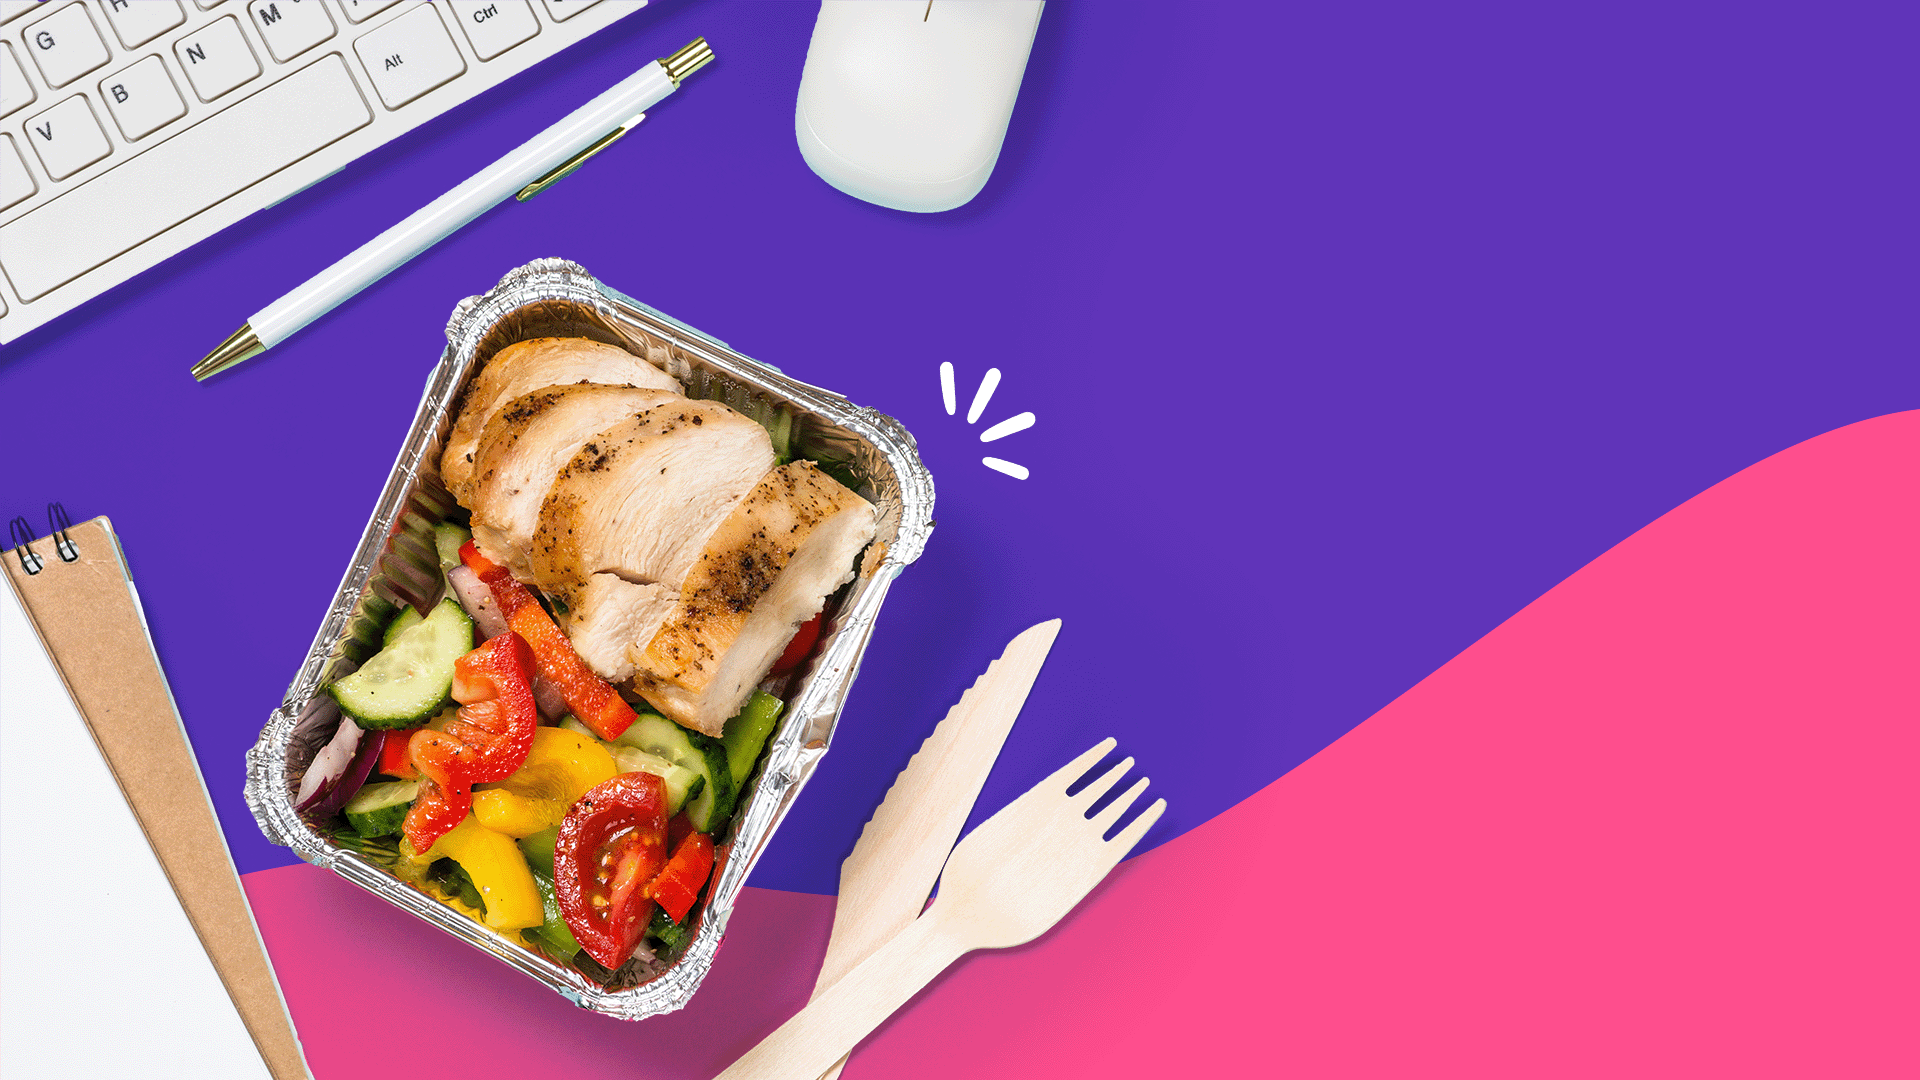 An image of a packed lunch represents how to stay healthy at work